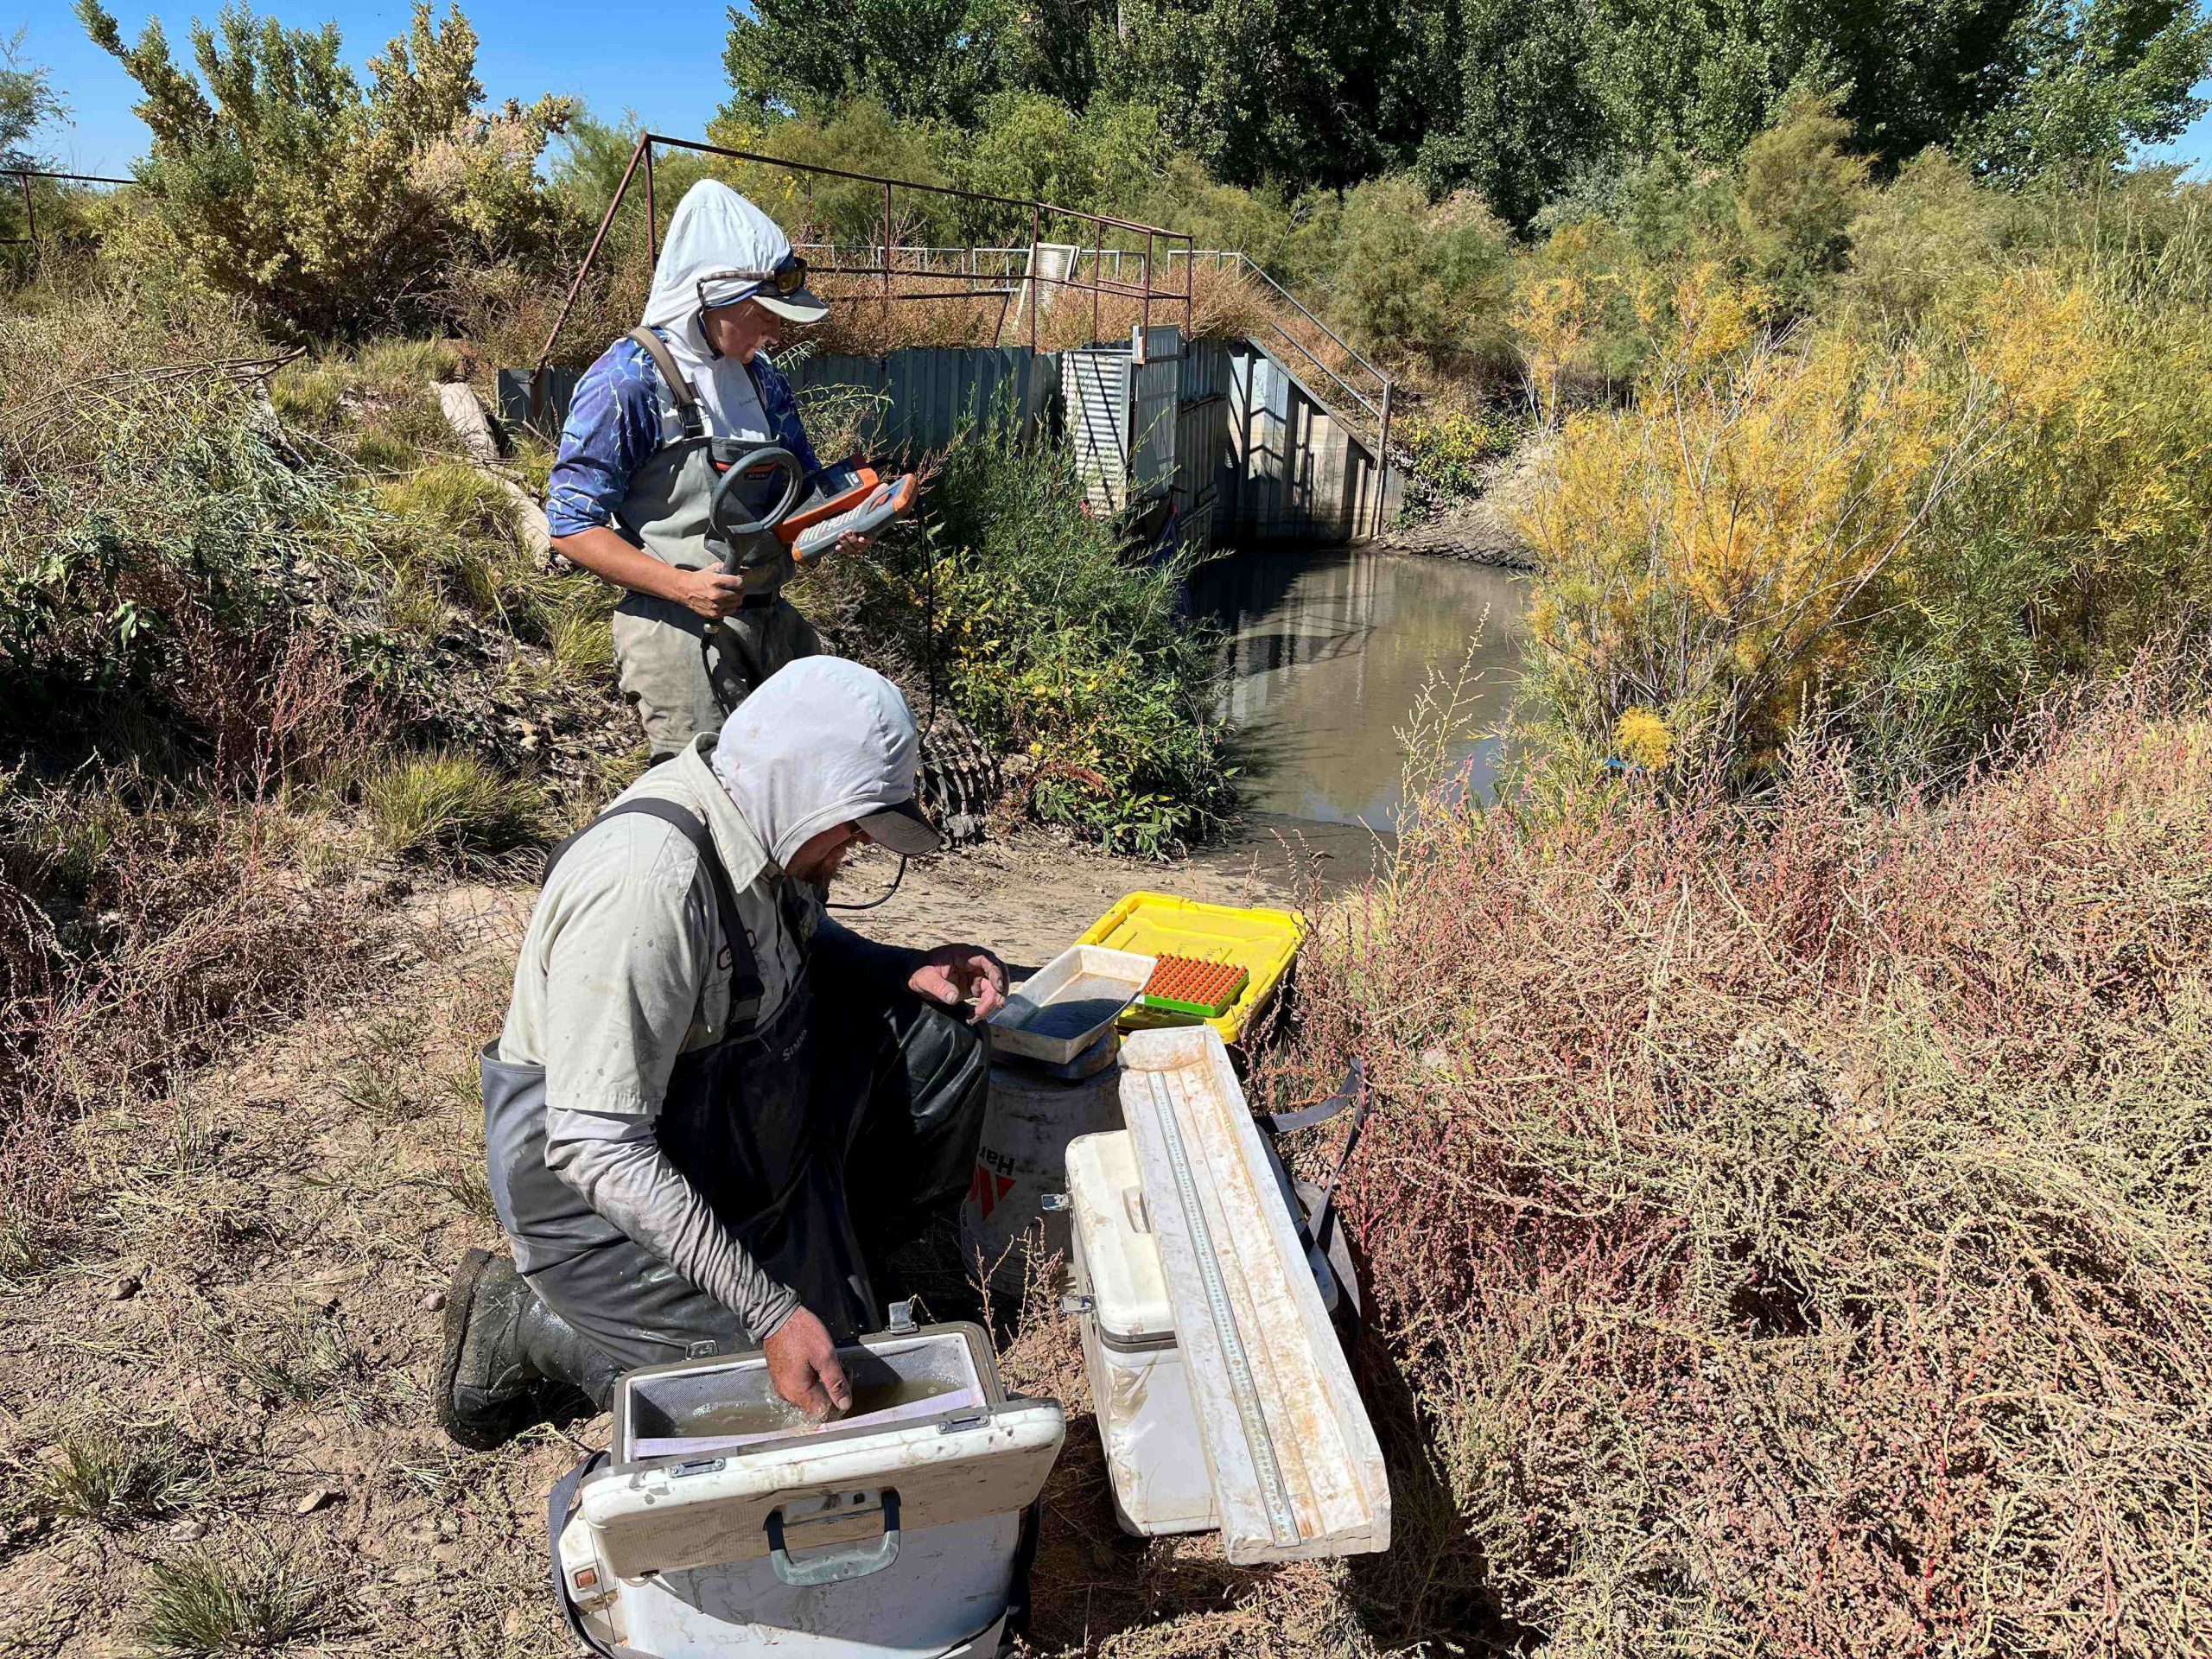 The U.S. Bureau of Reclamation invests $21 million from the Bipartisan Infrastructure Law to support endangered fish recovery programs across the Colorado River Basin.